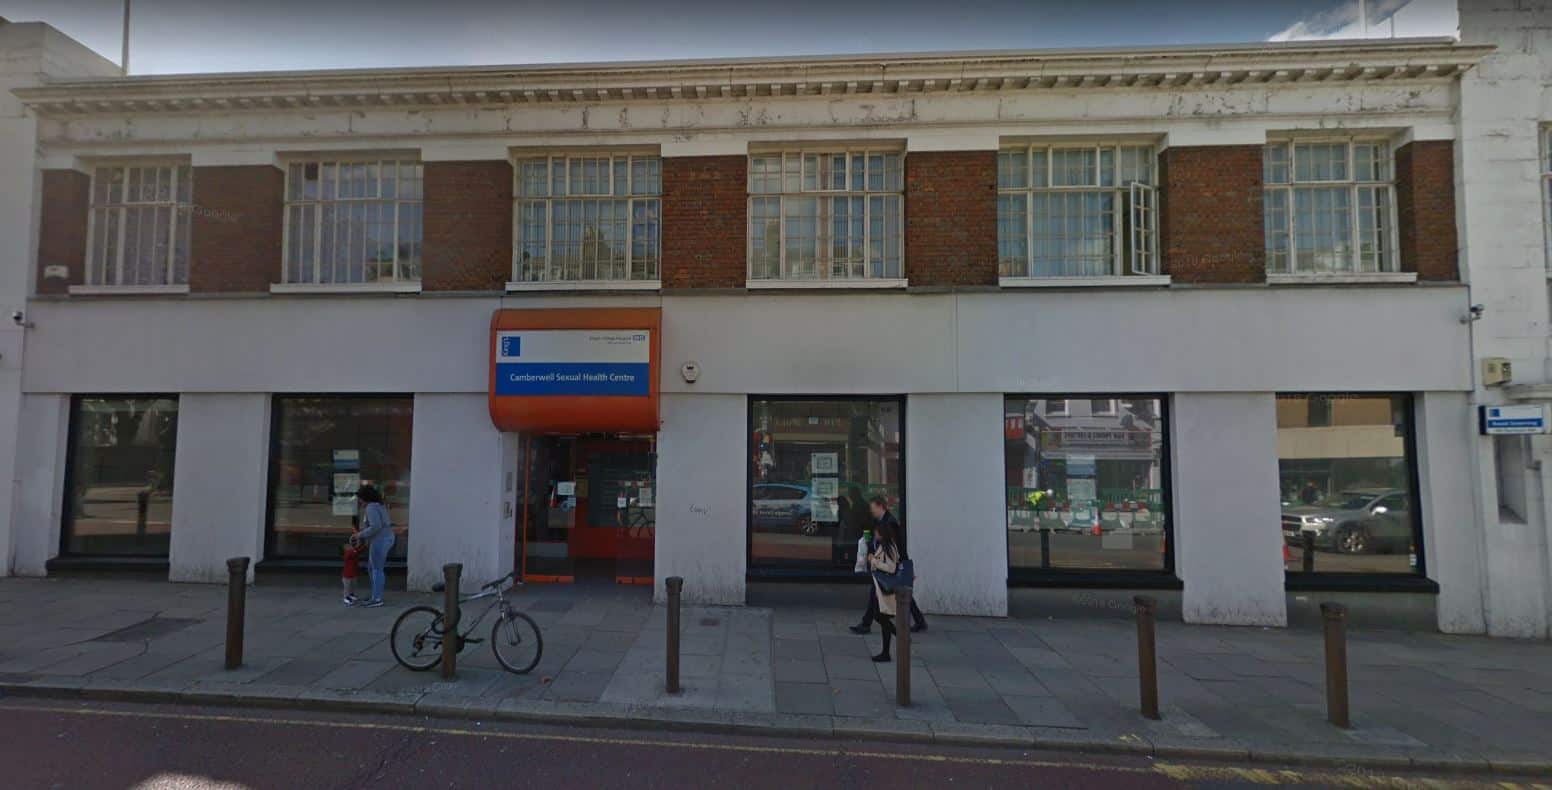 Camberwell Sexual Health Centre, where people can be tested for conditions such as syphilis (Image: Google Maps)